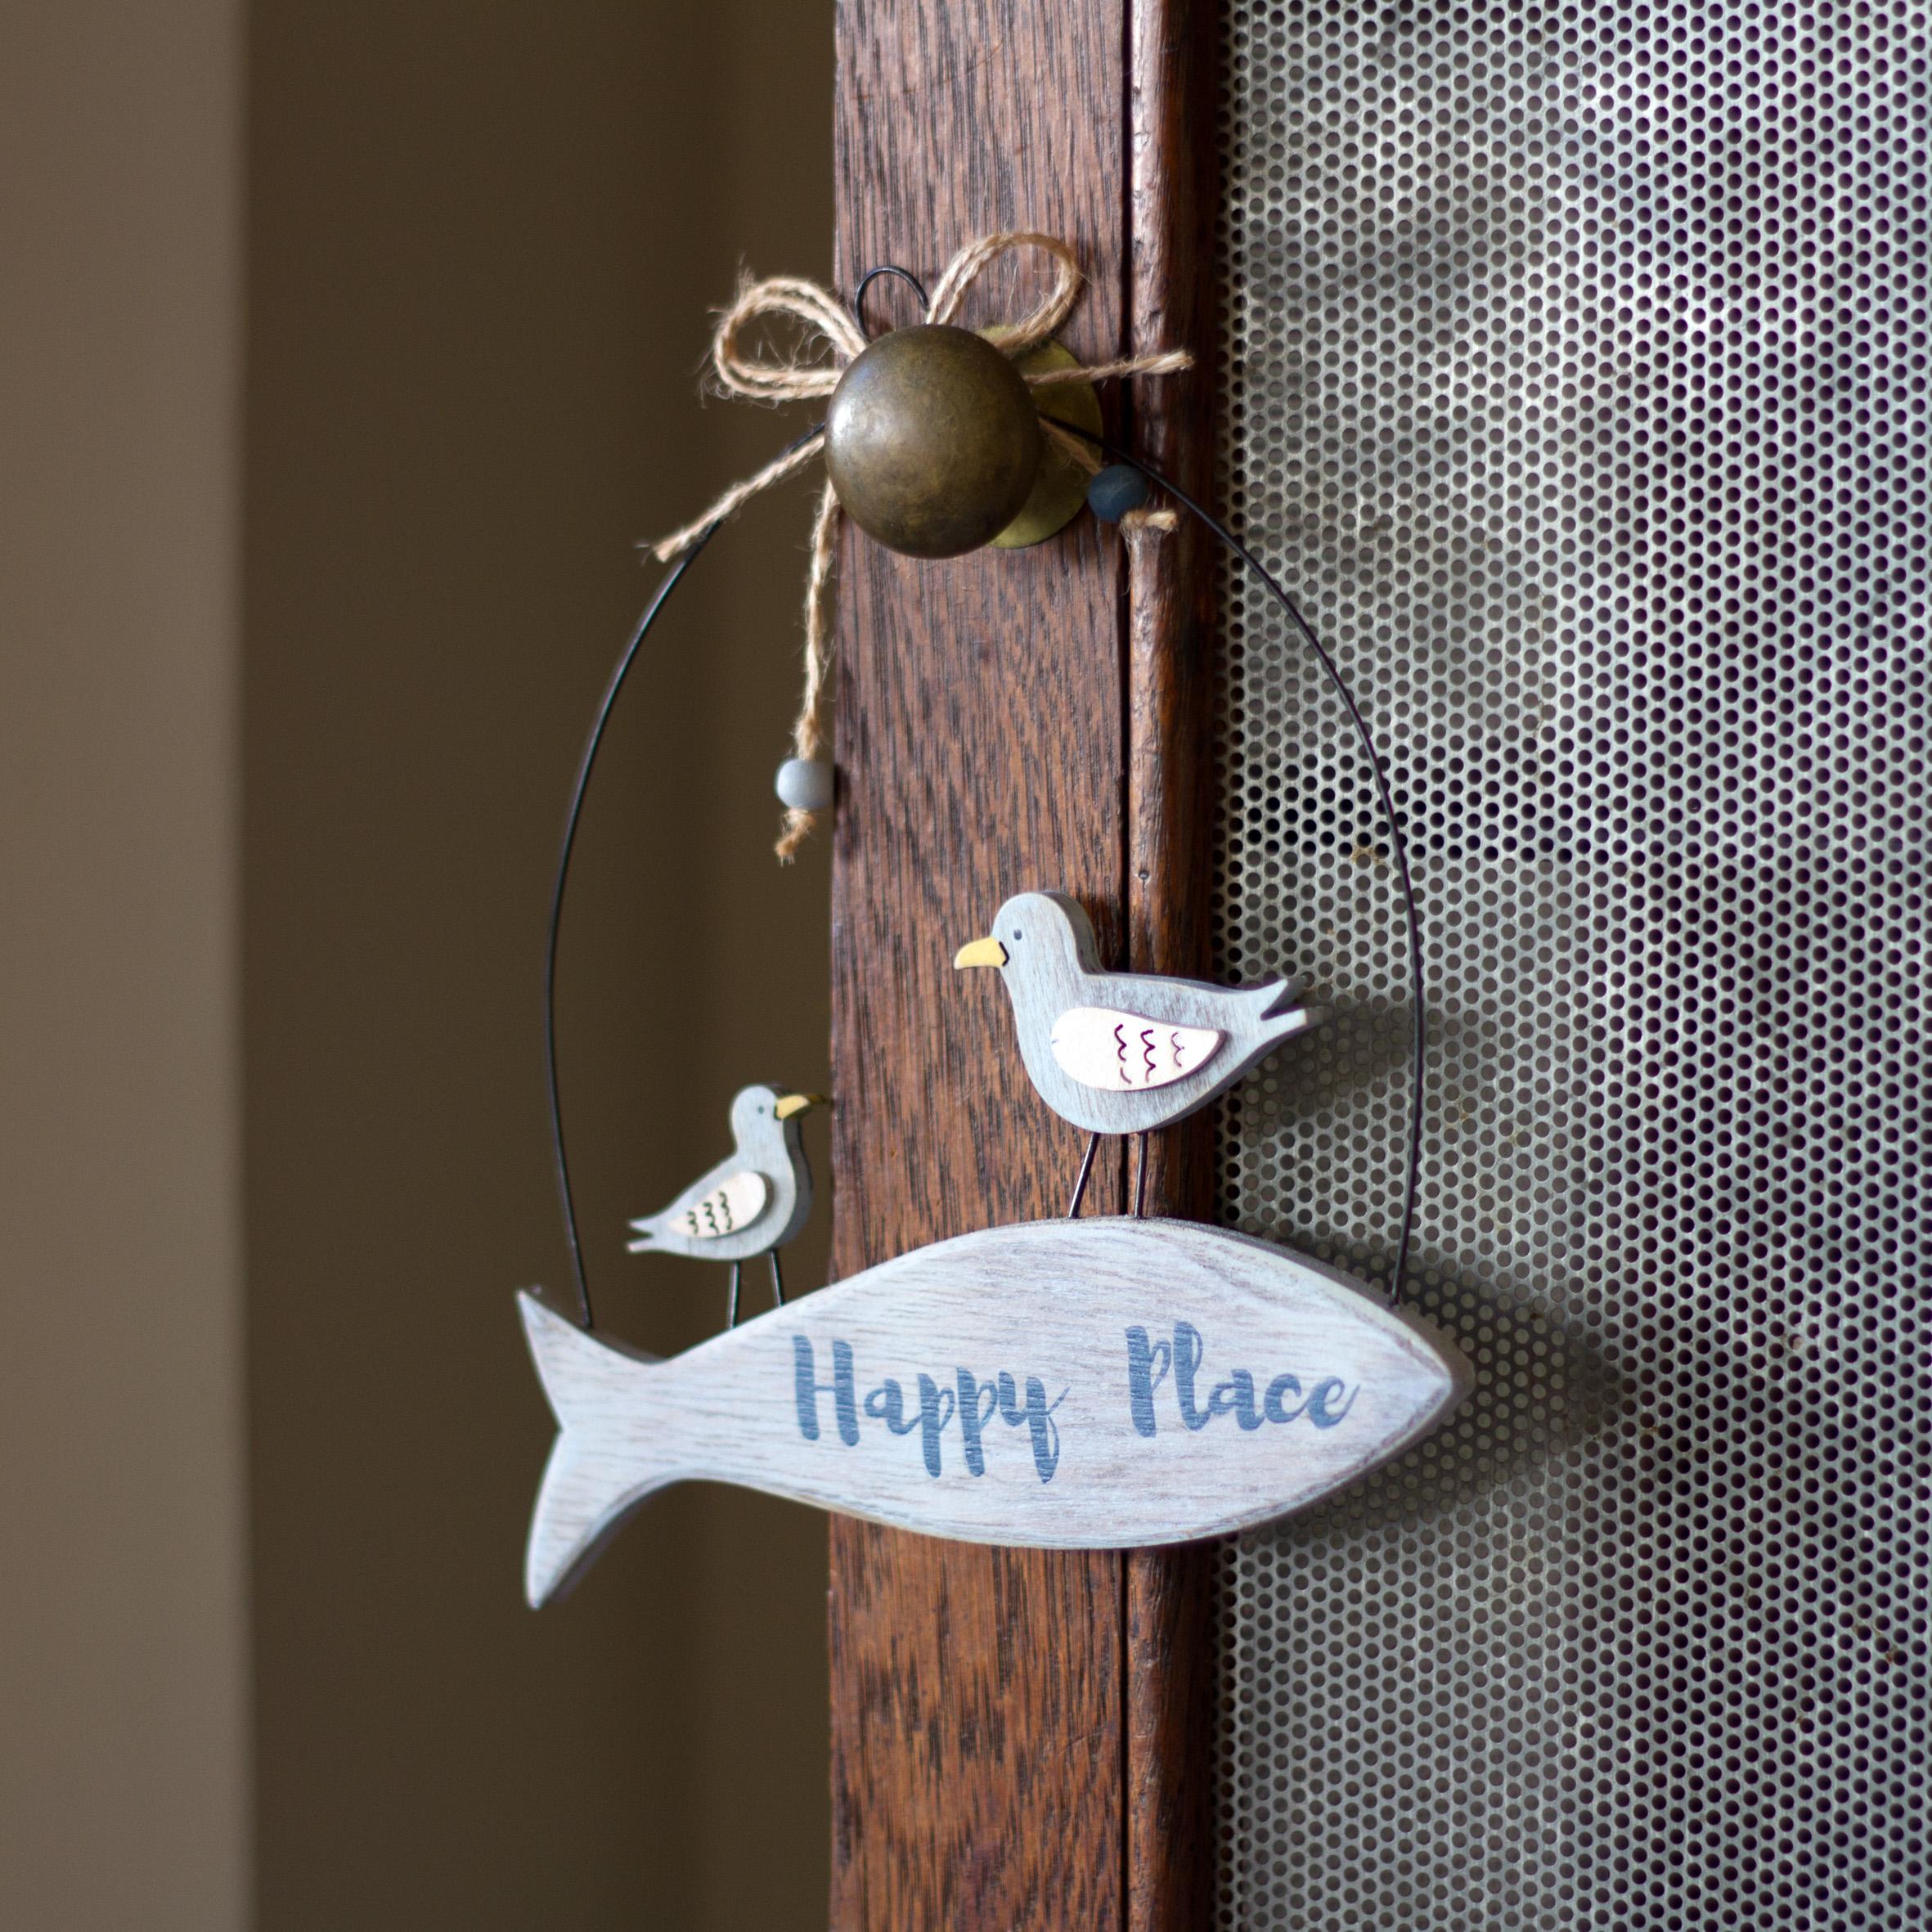 Happy place hanging sign